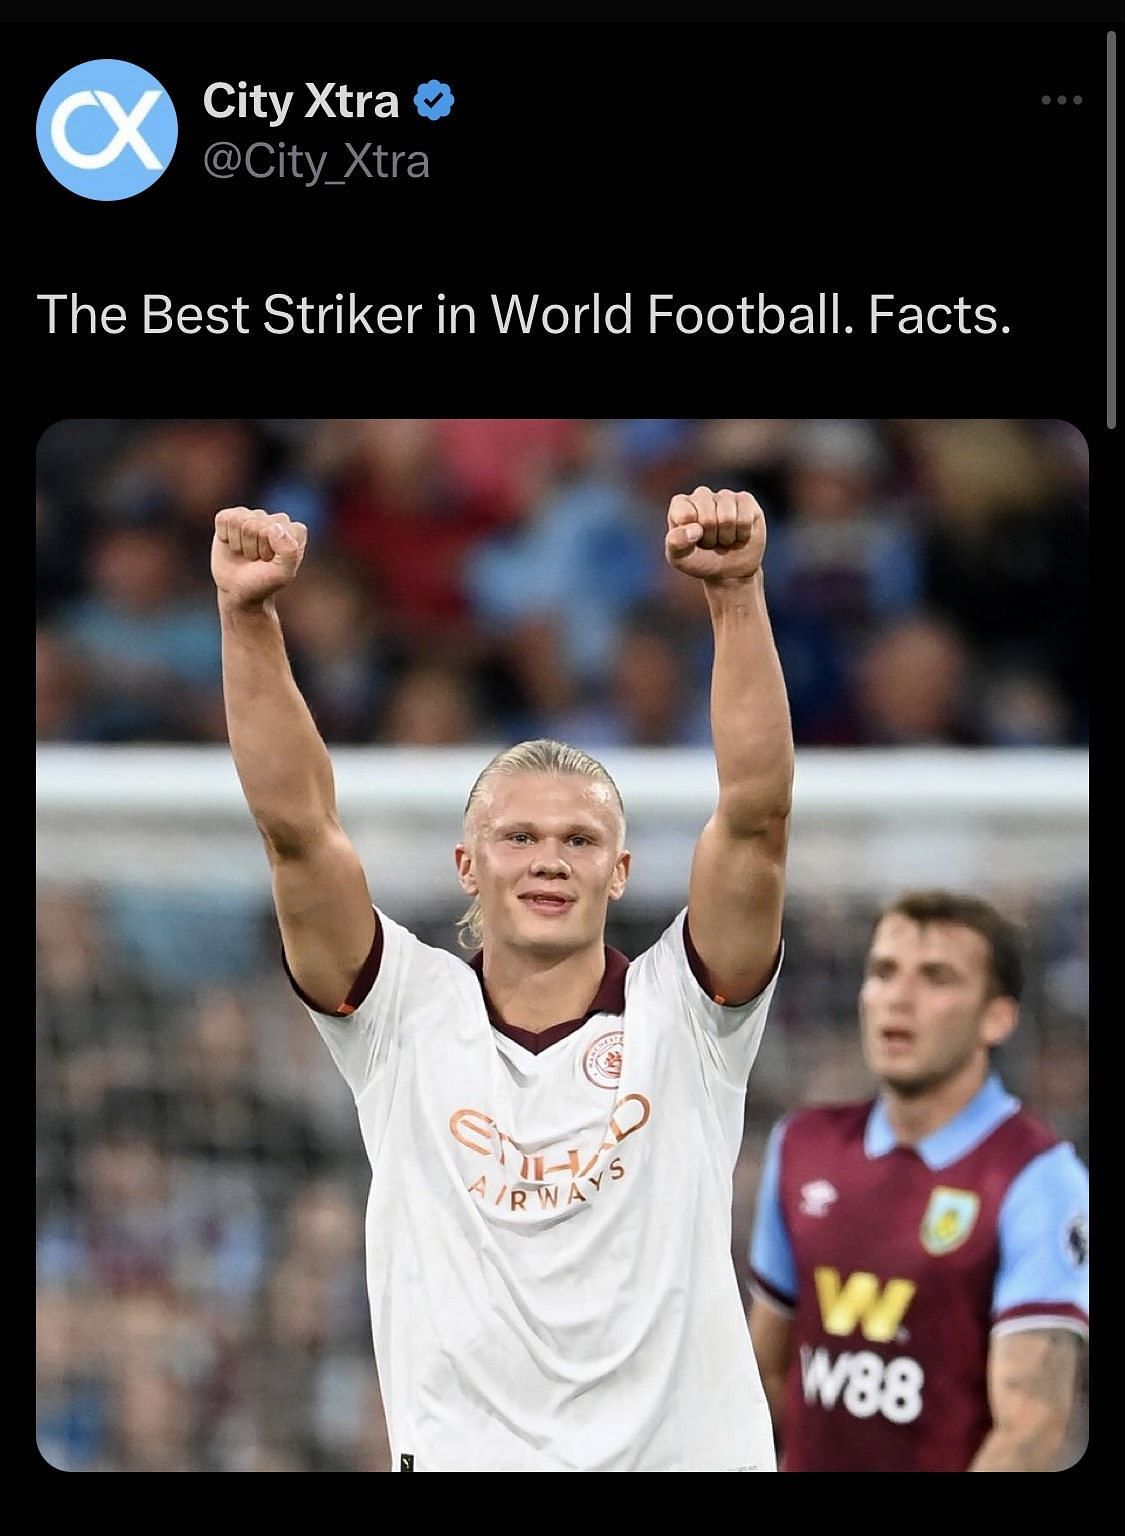 Haaland is lauded as the best striker in the world.